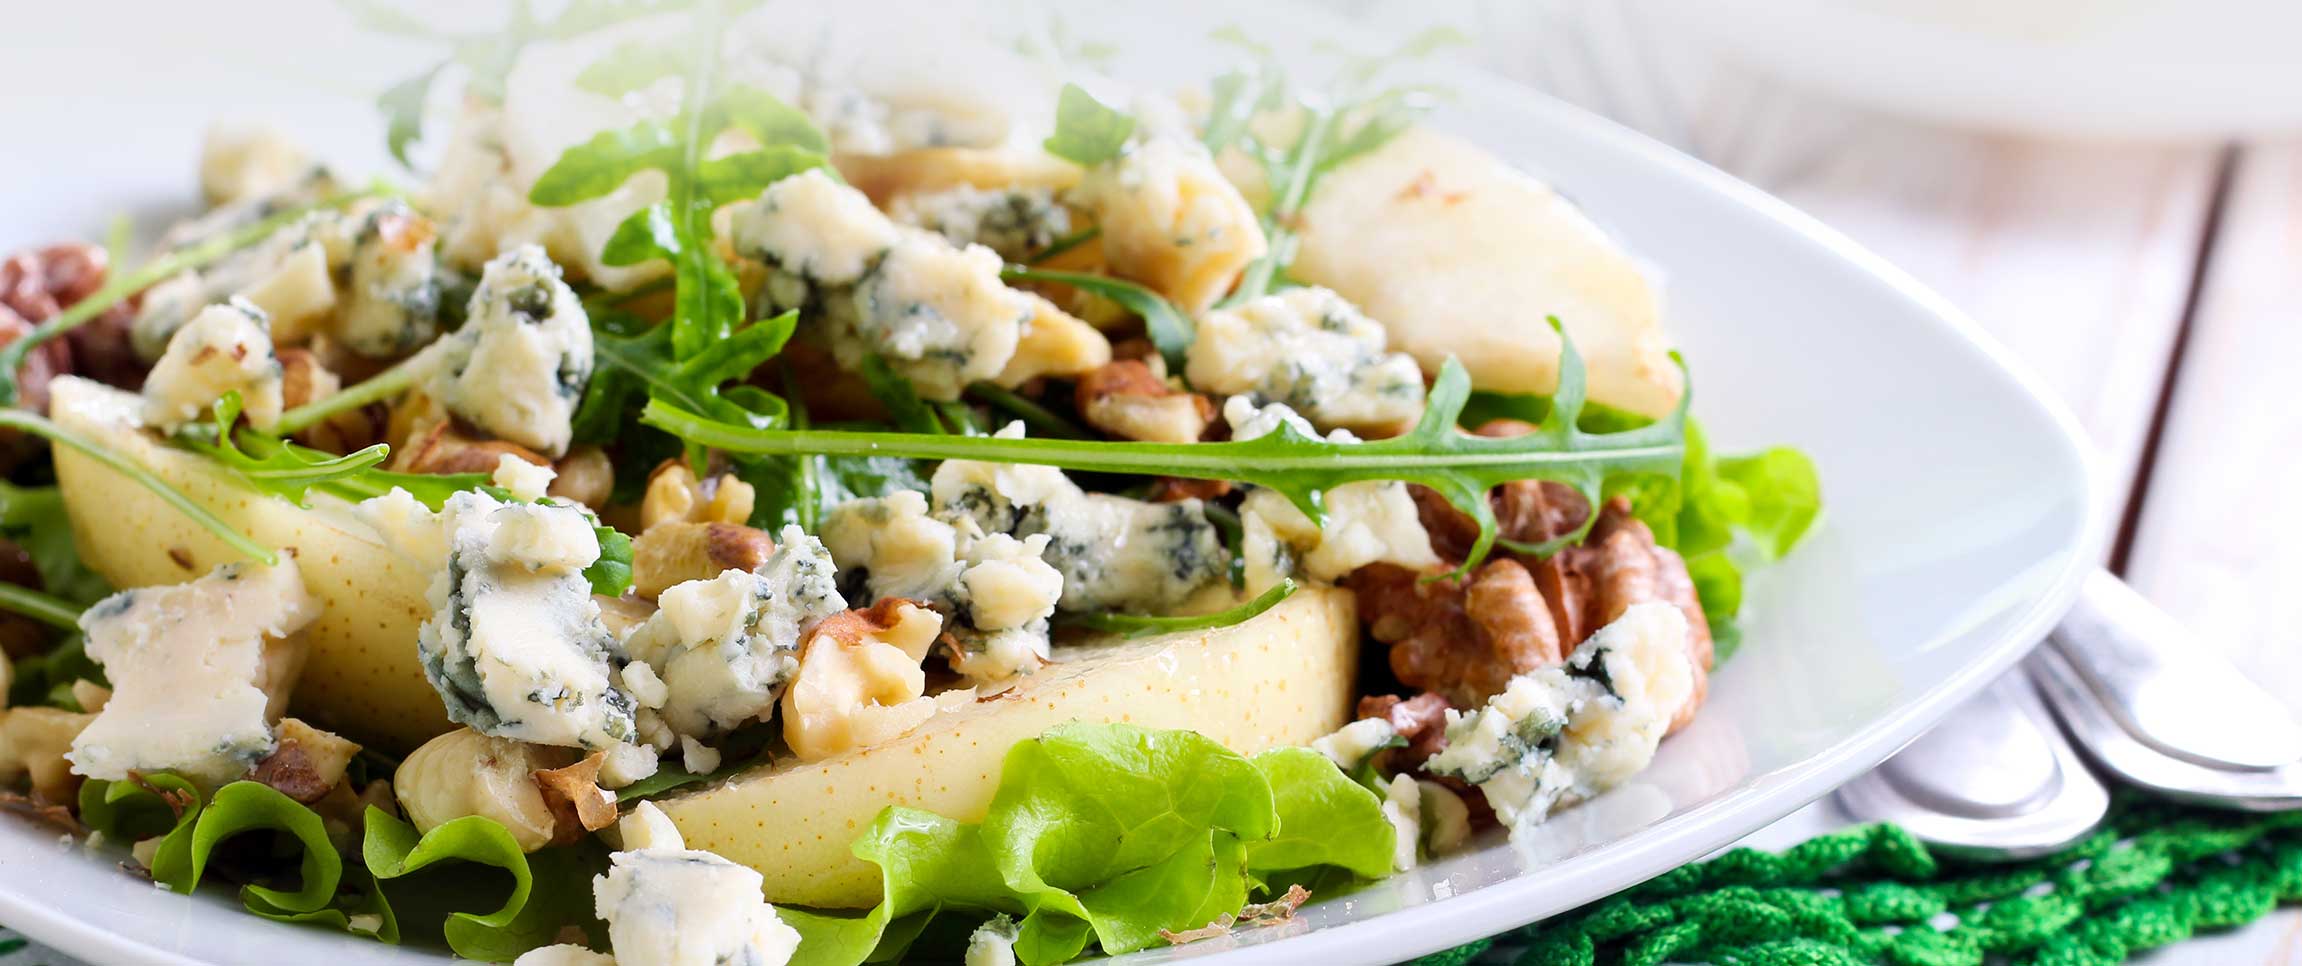 Spring Salad with Pears, Walnuts, and Blue Cheese Crumbles